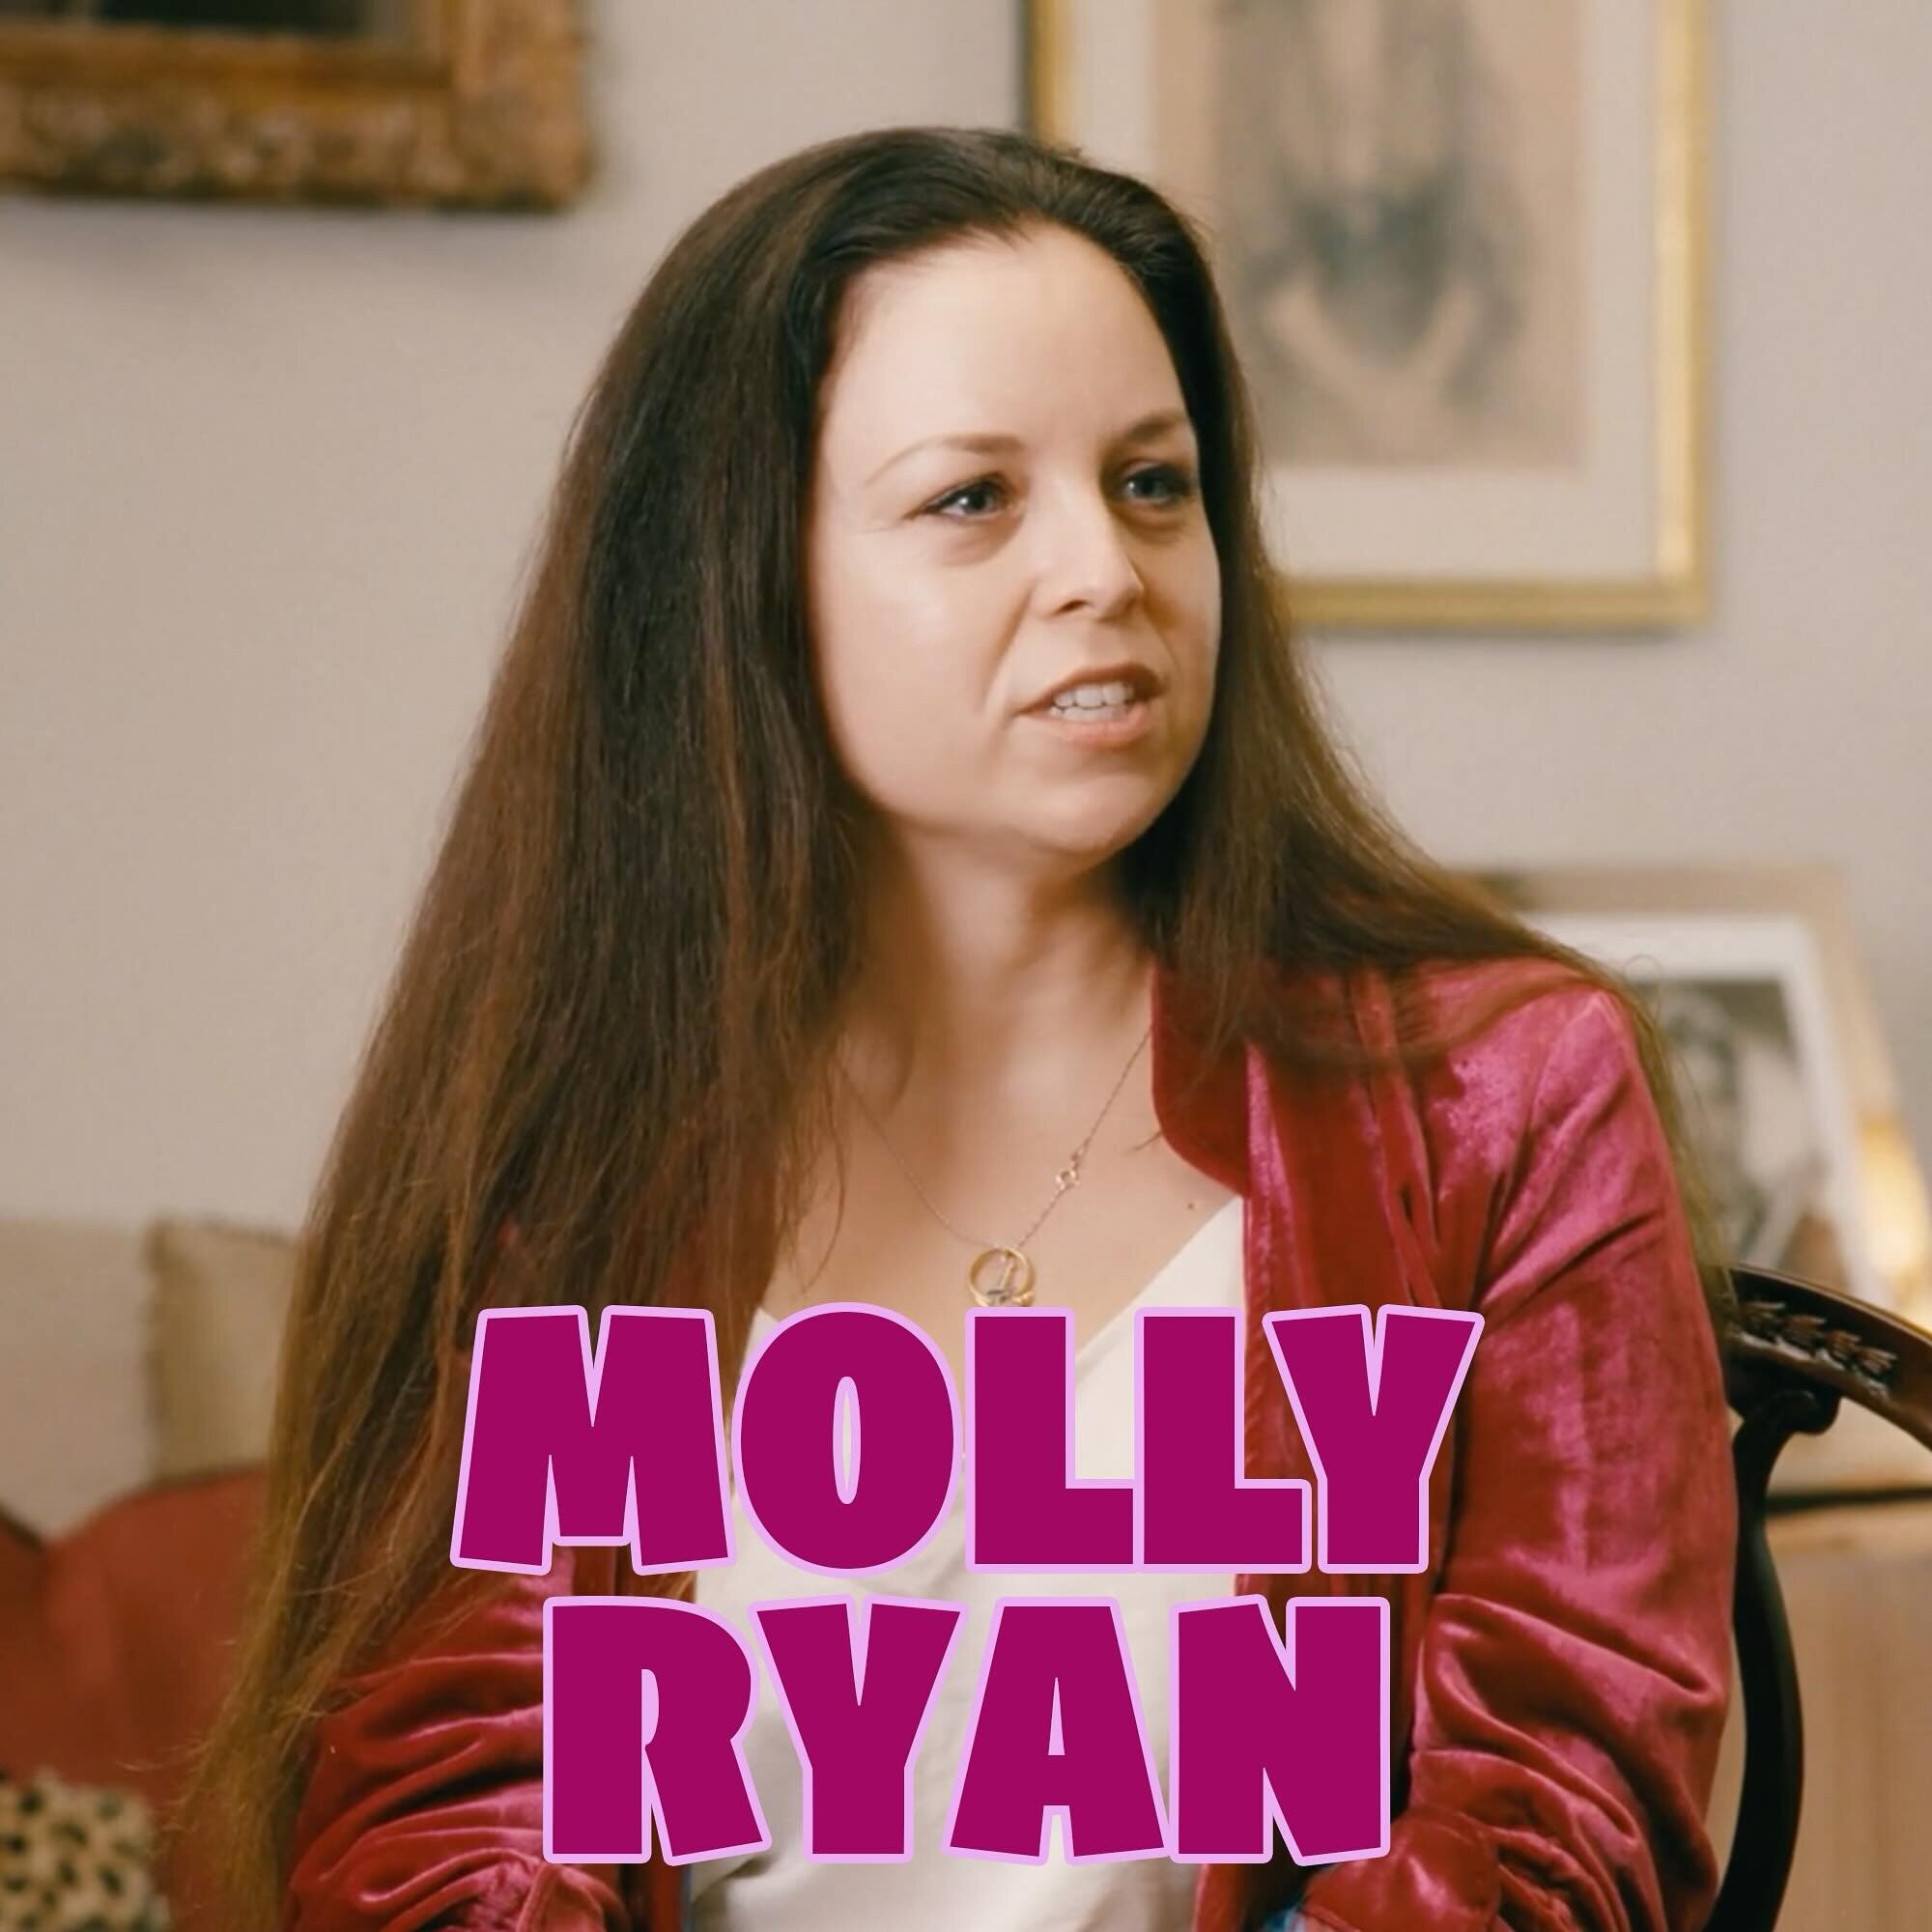 Rolling into the week thinking of @themollyryan ! For the second episode of &ldquo;On The Back Porch, Season 2&rdquo; we welcome Molly Ryan, one of the most sought-after jazz vocalists on the New York jazz scene. She can even be heard on the Grammy A